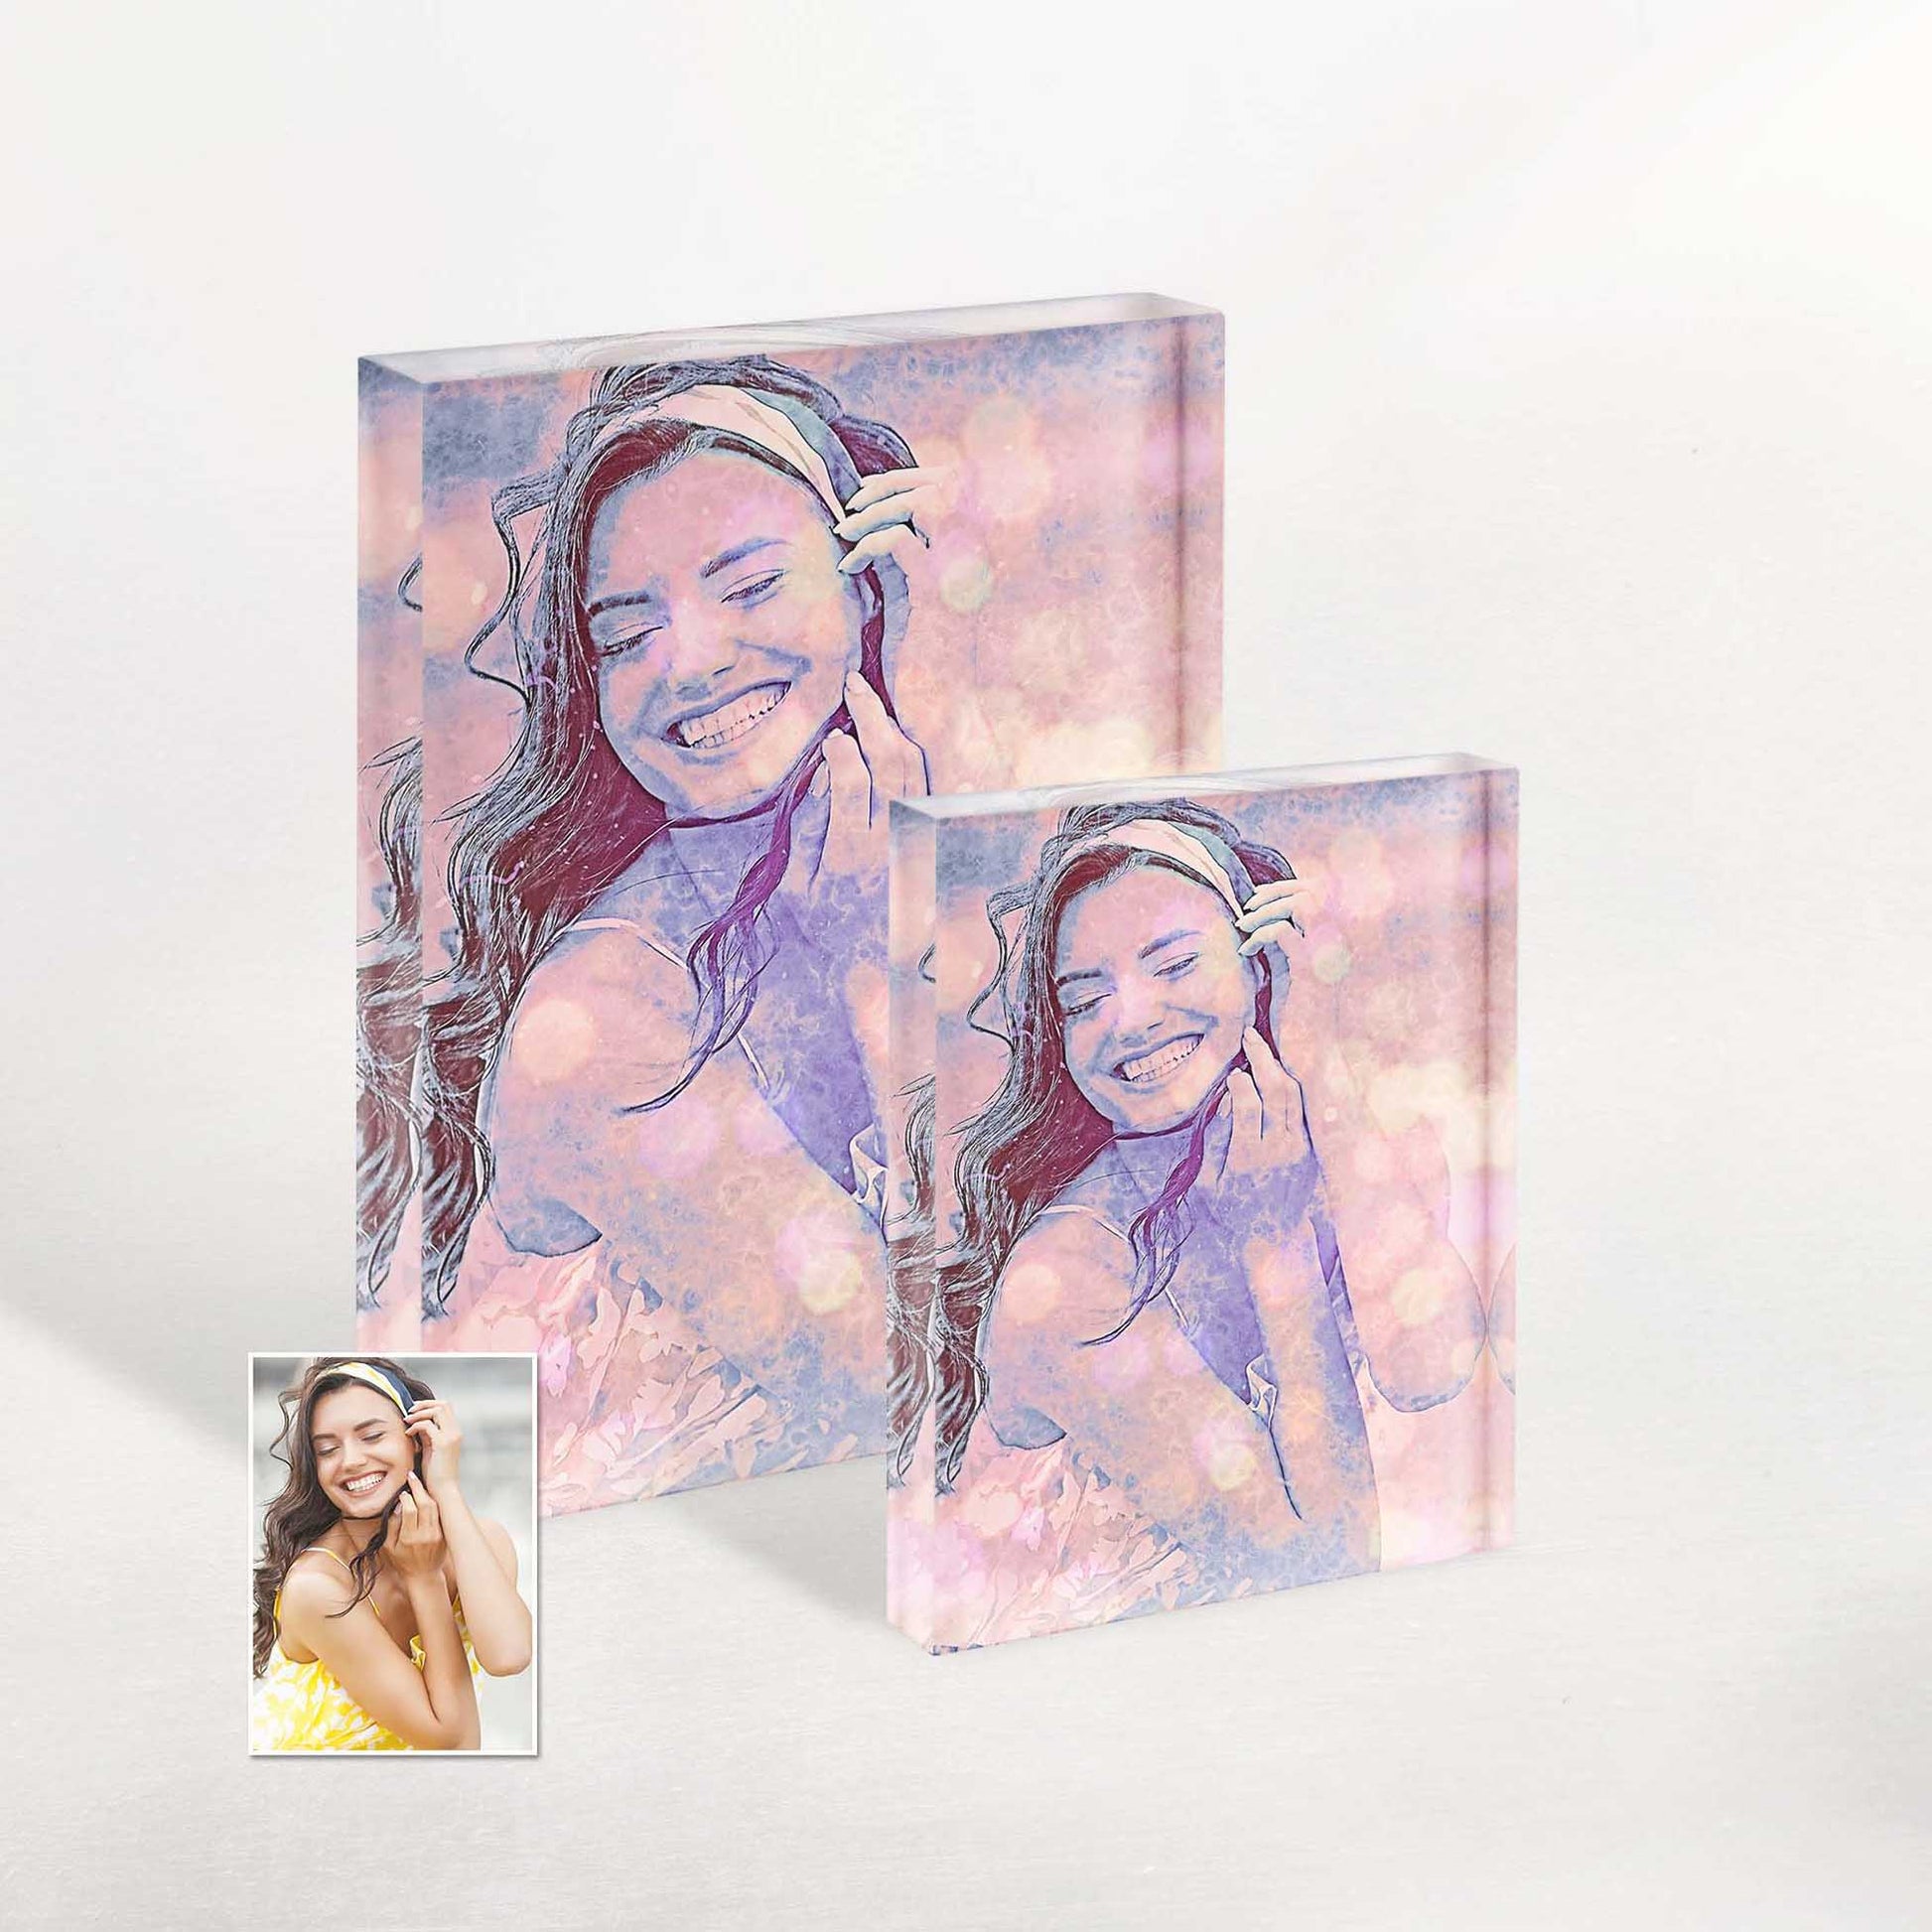 Unleash your creativity with a Personalised Special FX Acrylic Block Photo, offering a film effect that exudes a cool and fresh aesthetic. This novelty and unique artwork is made to order, making it an ideal anniversary or birthday gift